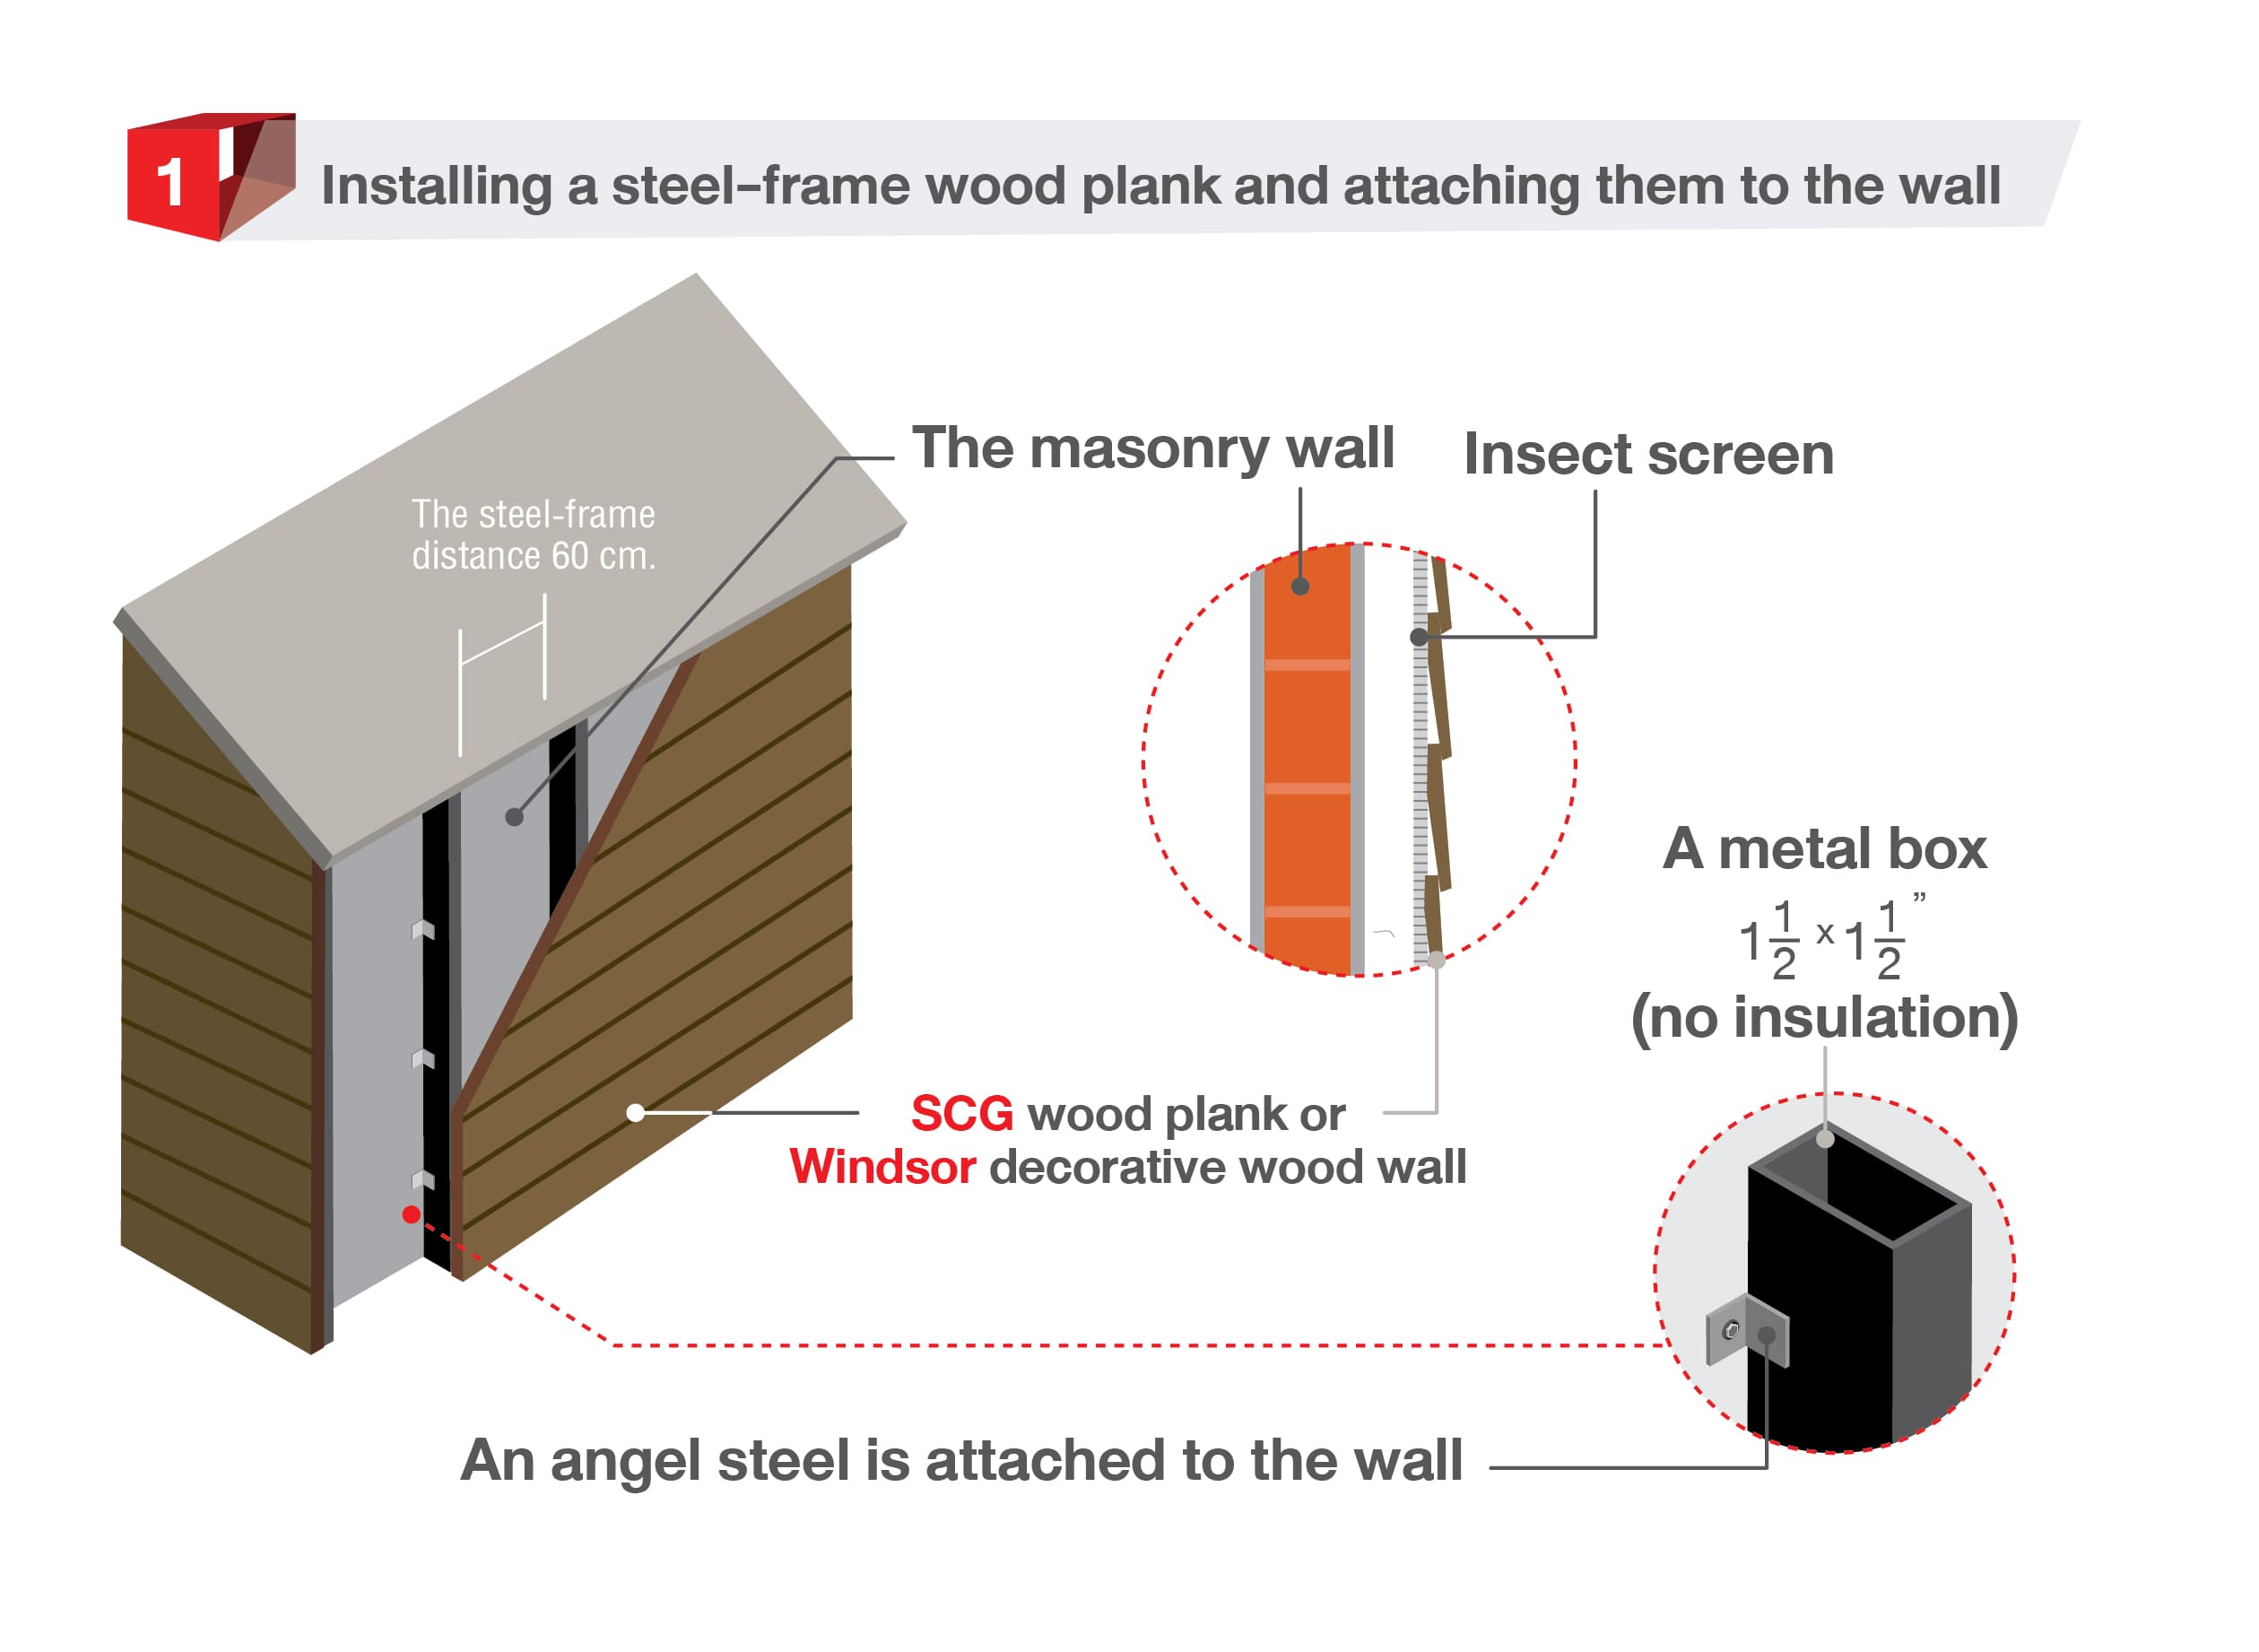 How to install wall insulation with wood plank